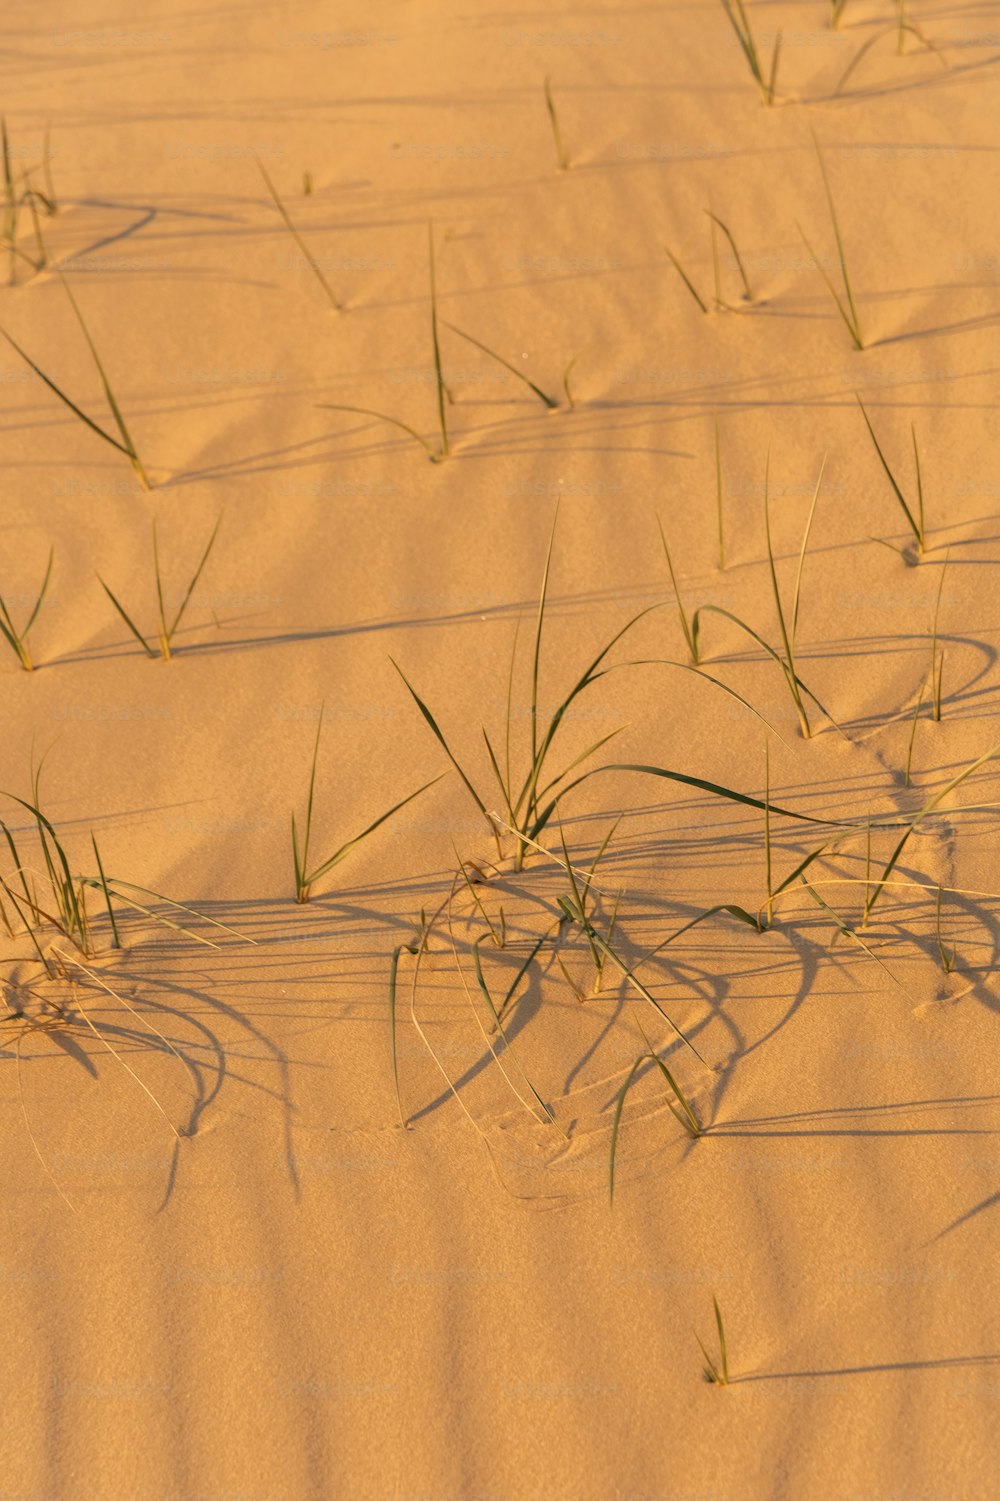 the grass is growing out of the sand